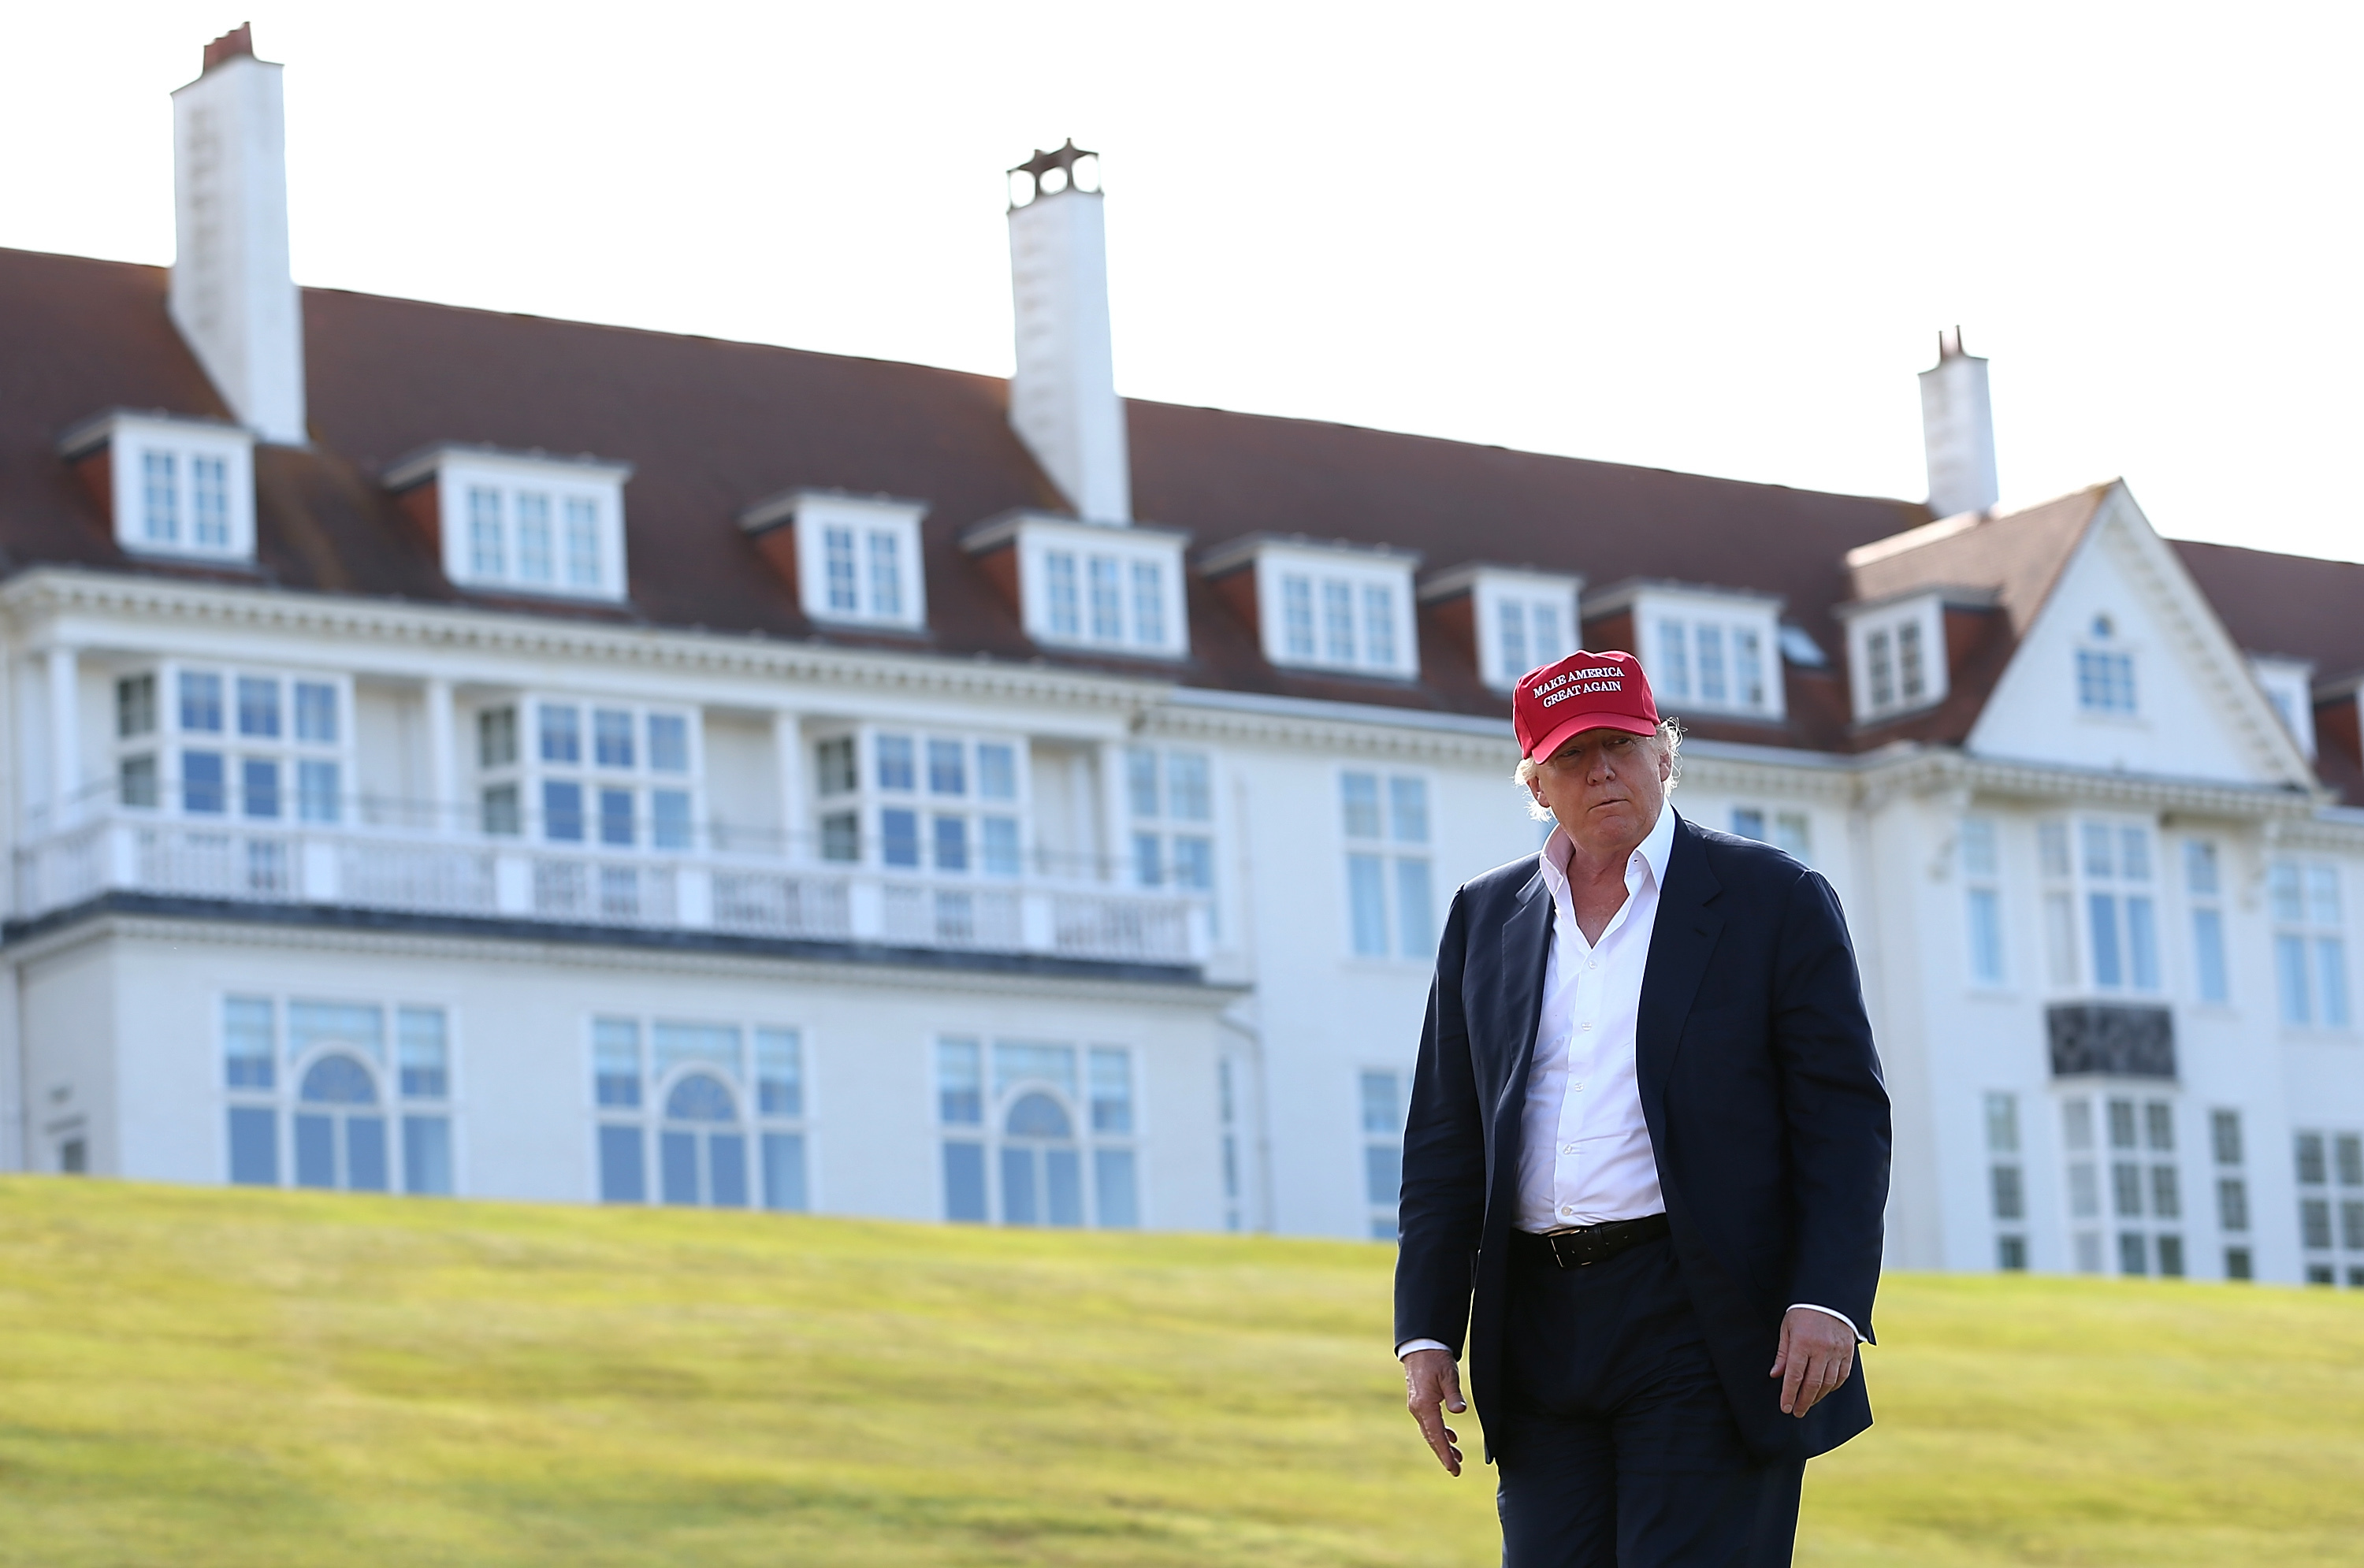 Donald Trump visits his Turnberry course last year (Jan Kruger/Getty Images)